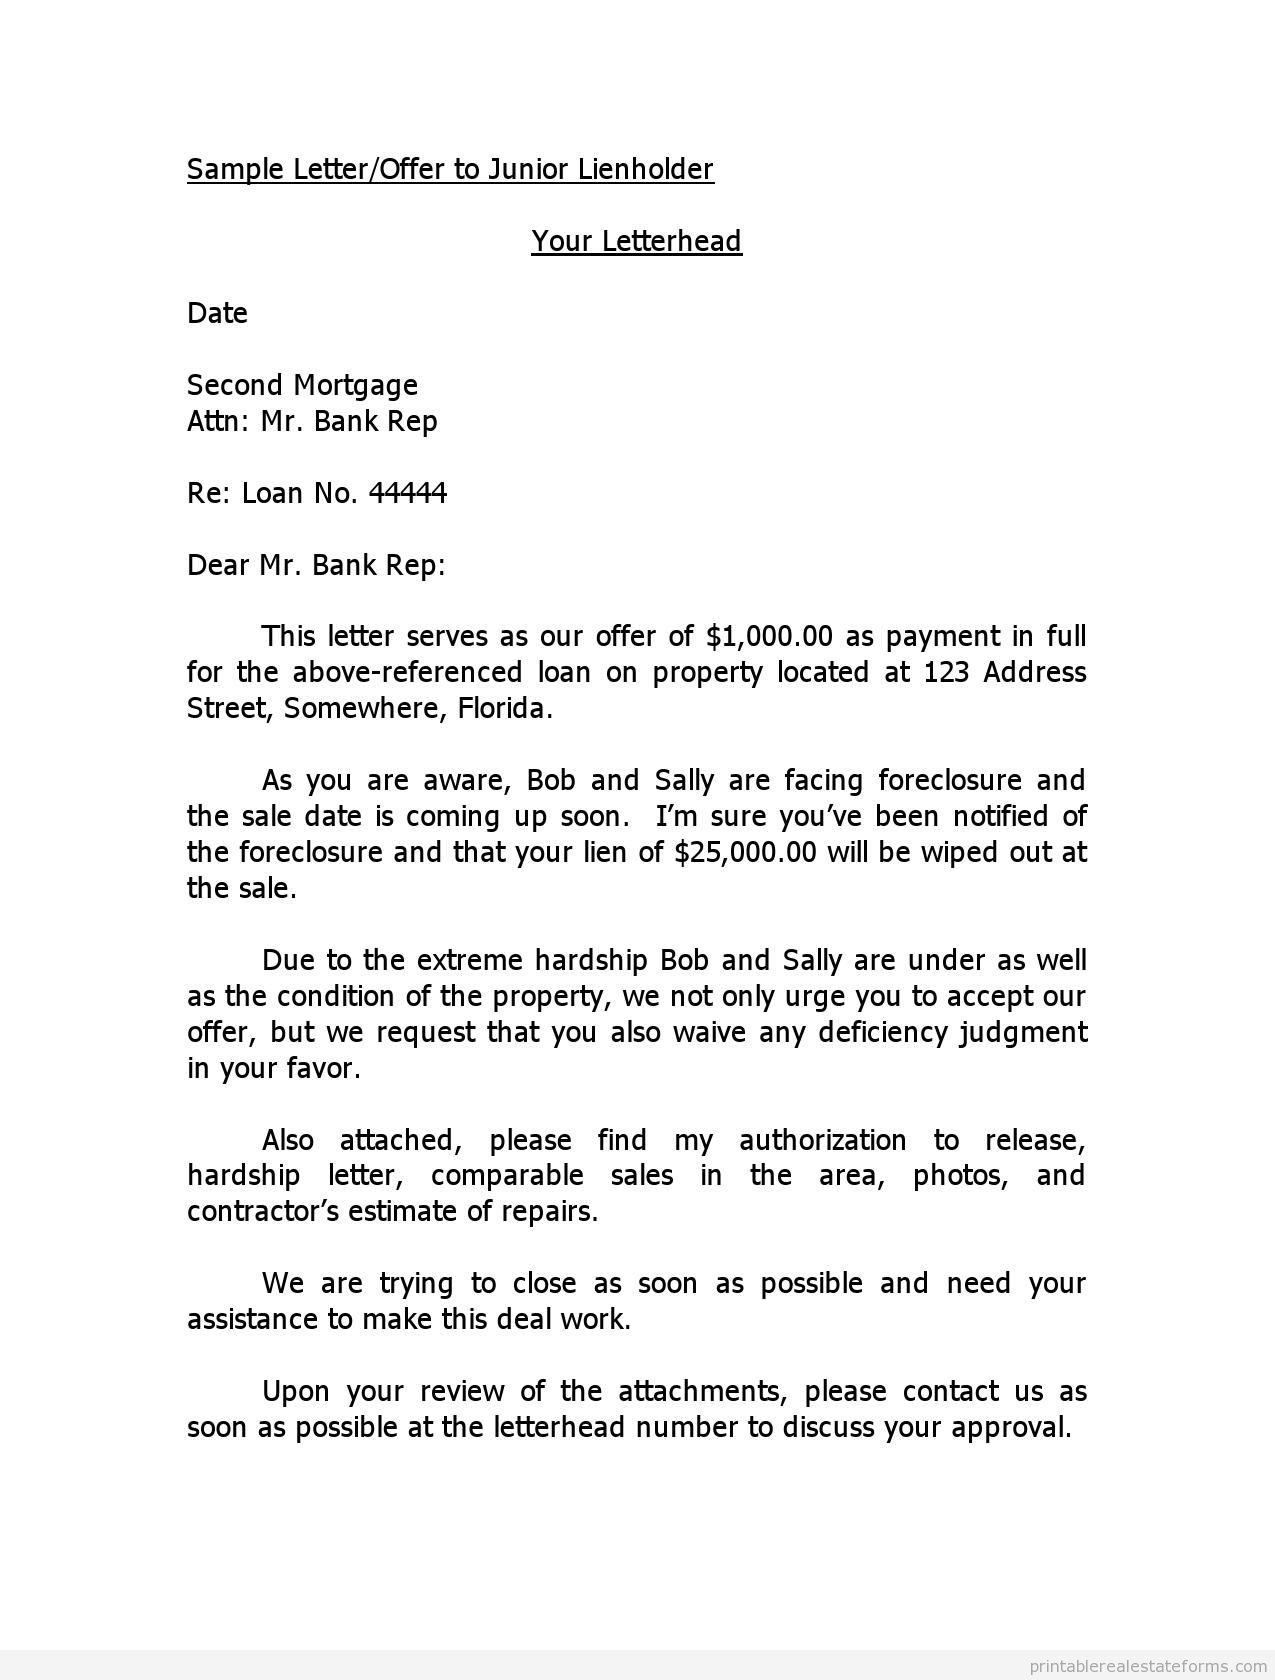 Letter Of Offer to Purchase Property Template - Letter Intent Delinquencye to foreclose Florida Purchase